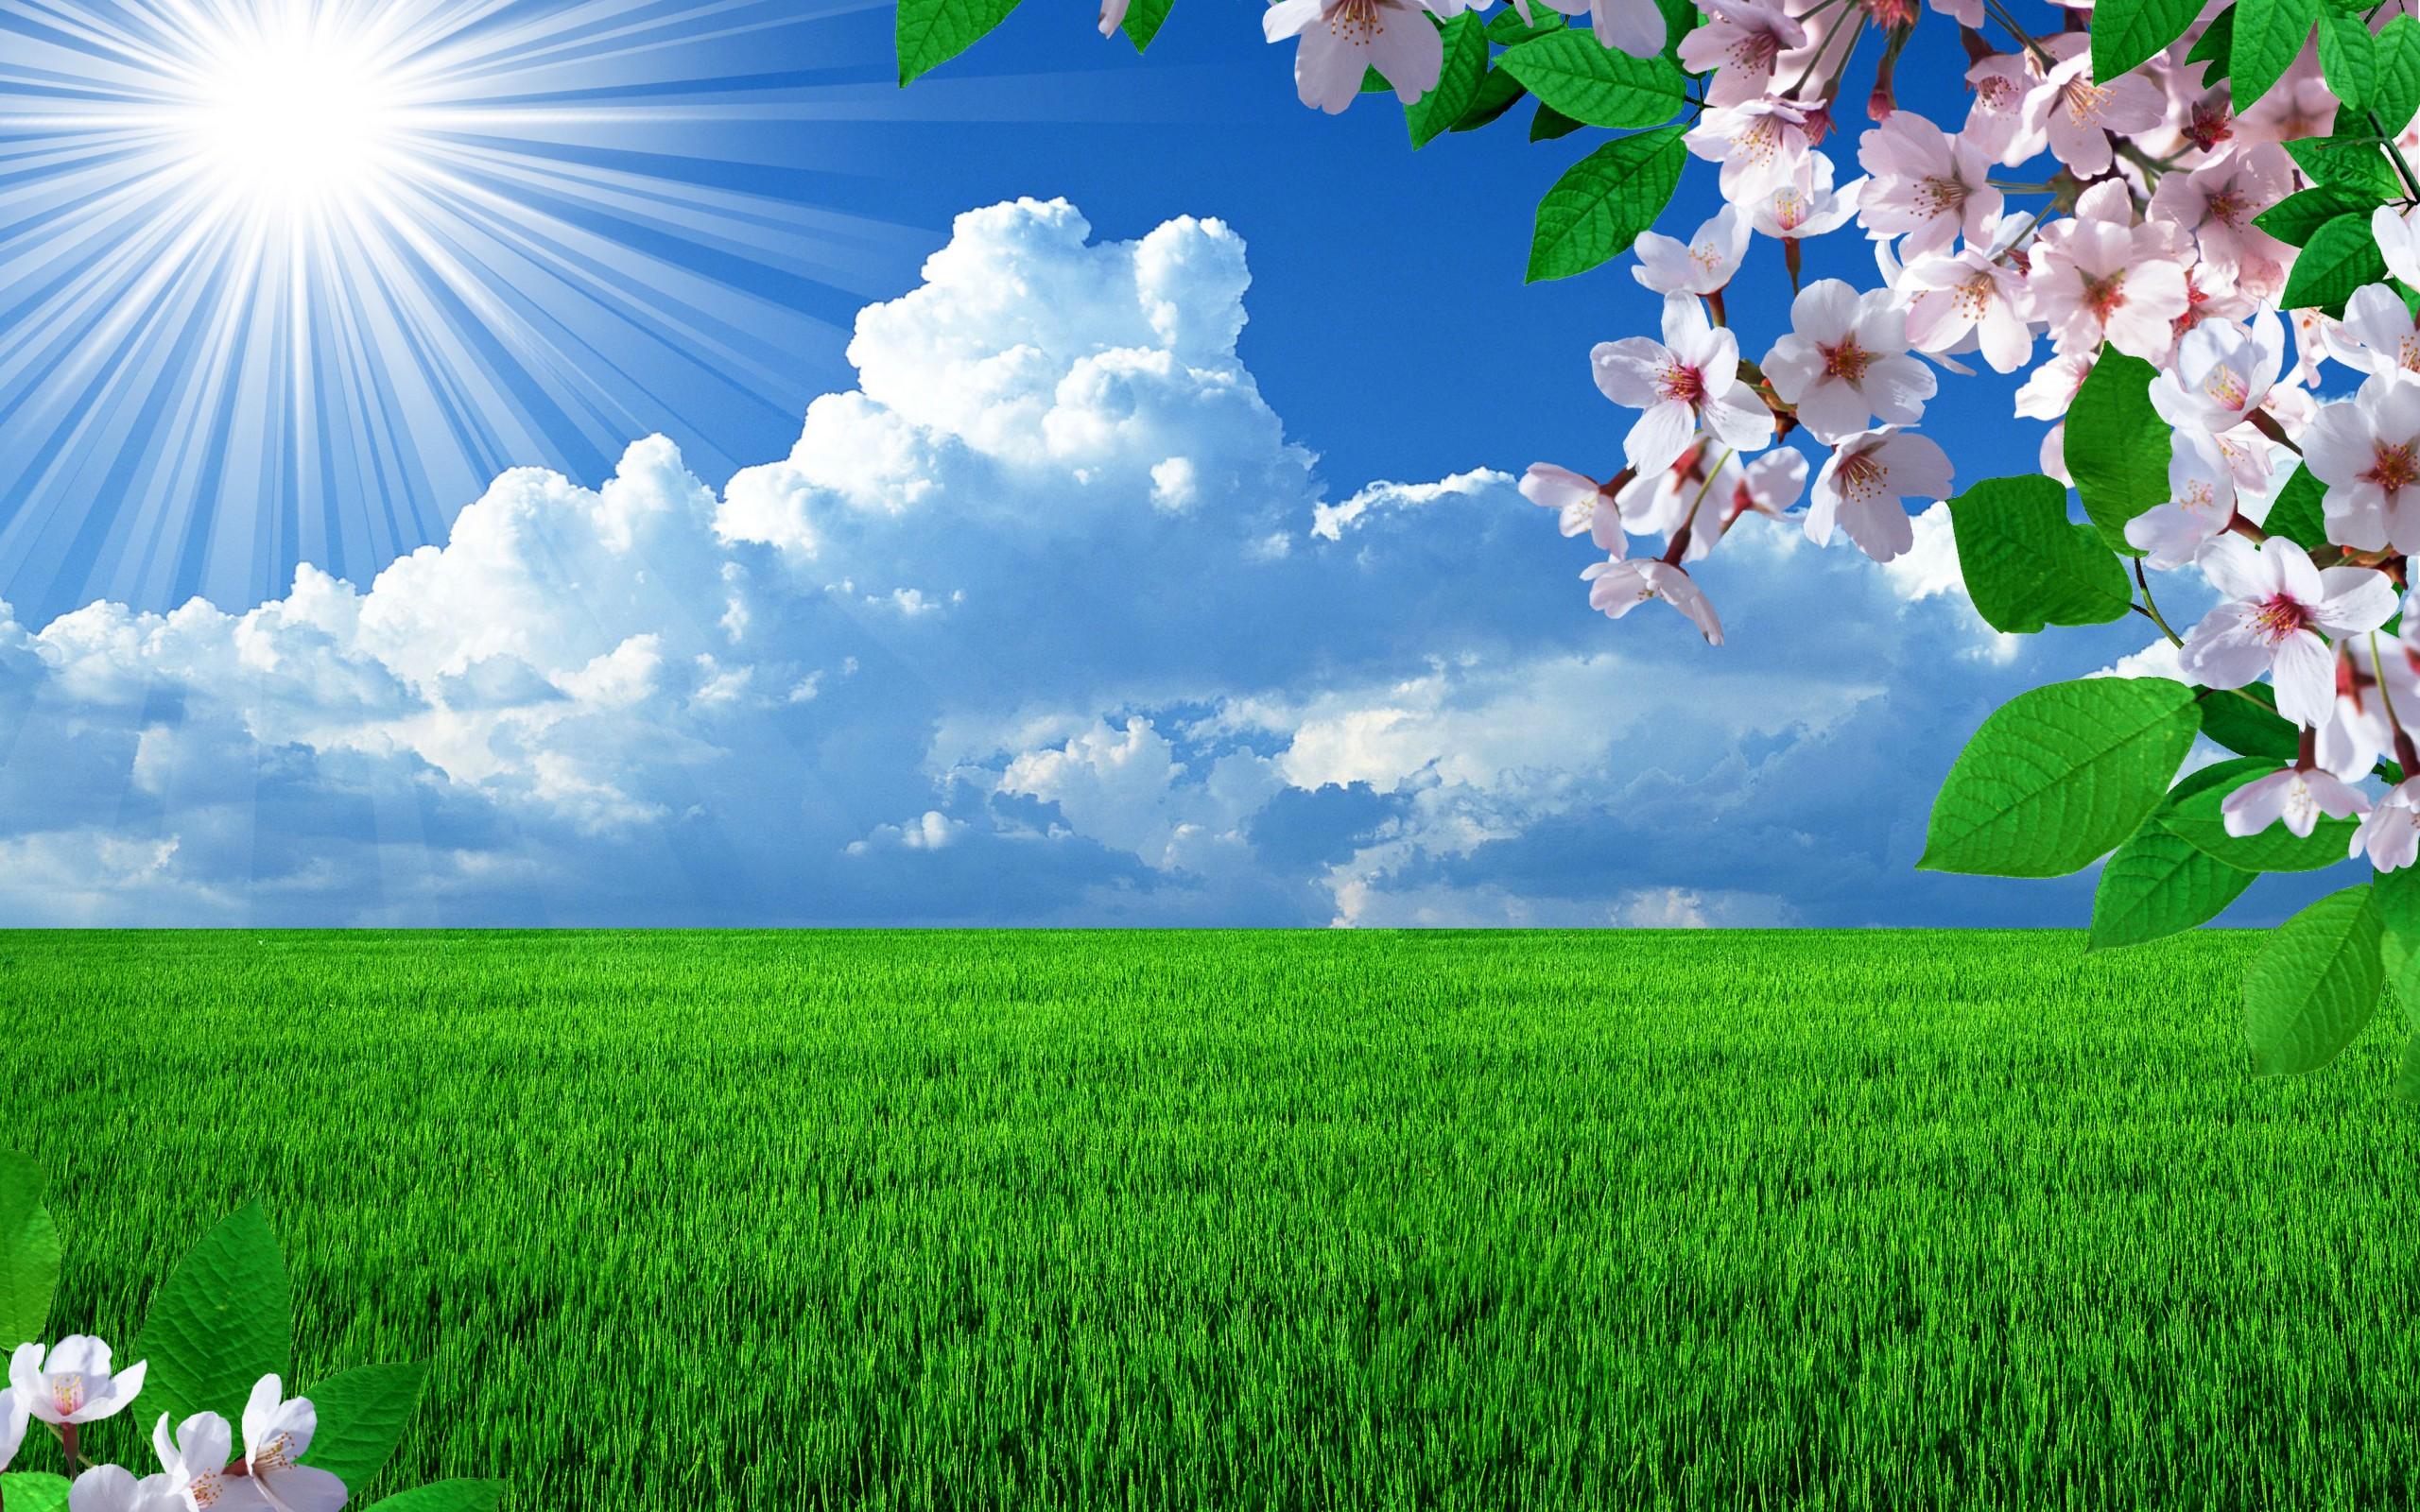 Grass And Sky Backgrounds - Sunrise Nature Images Hd - 2560x1600 Wallpaper  